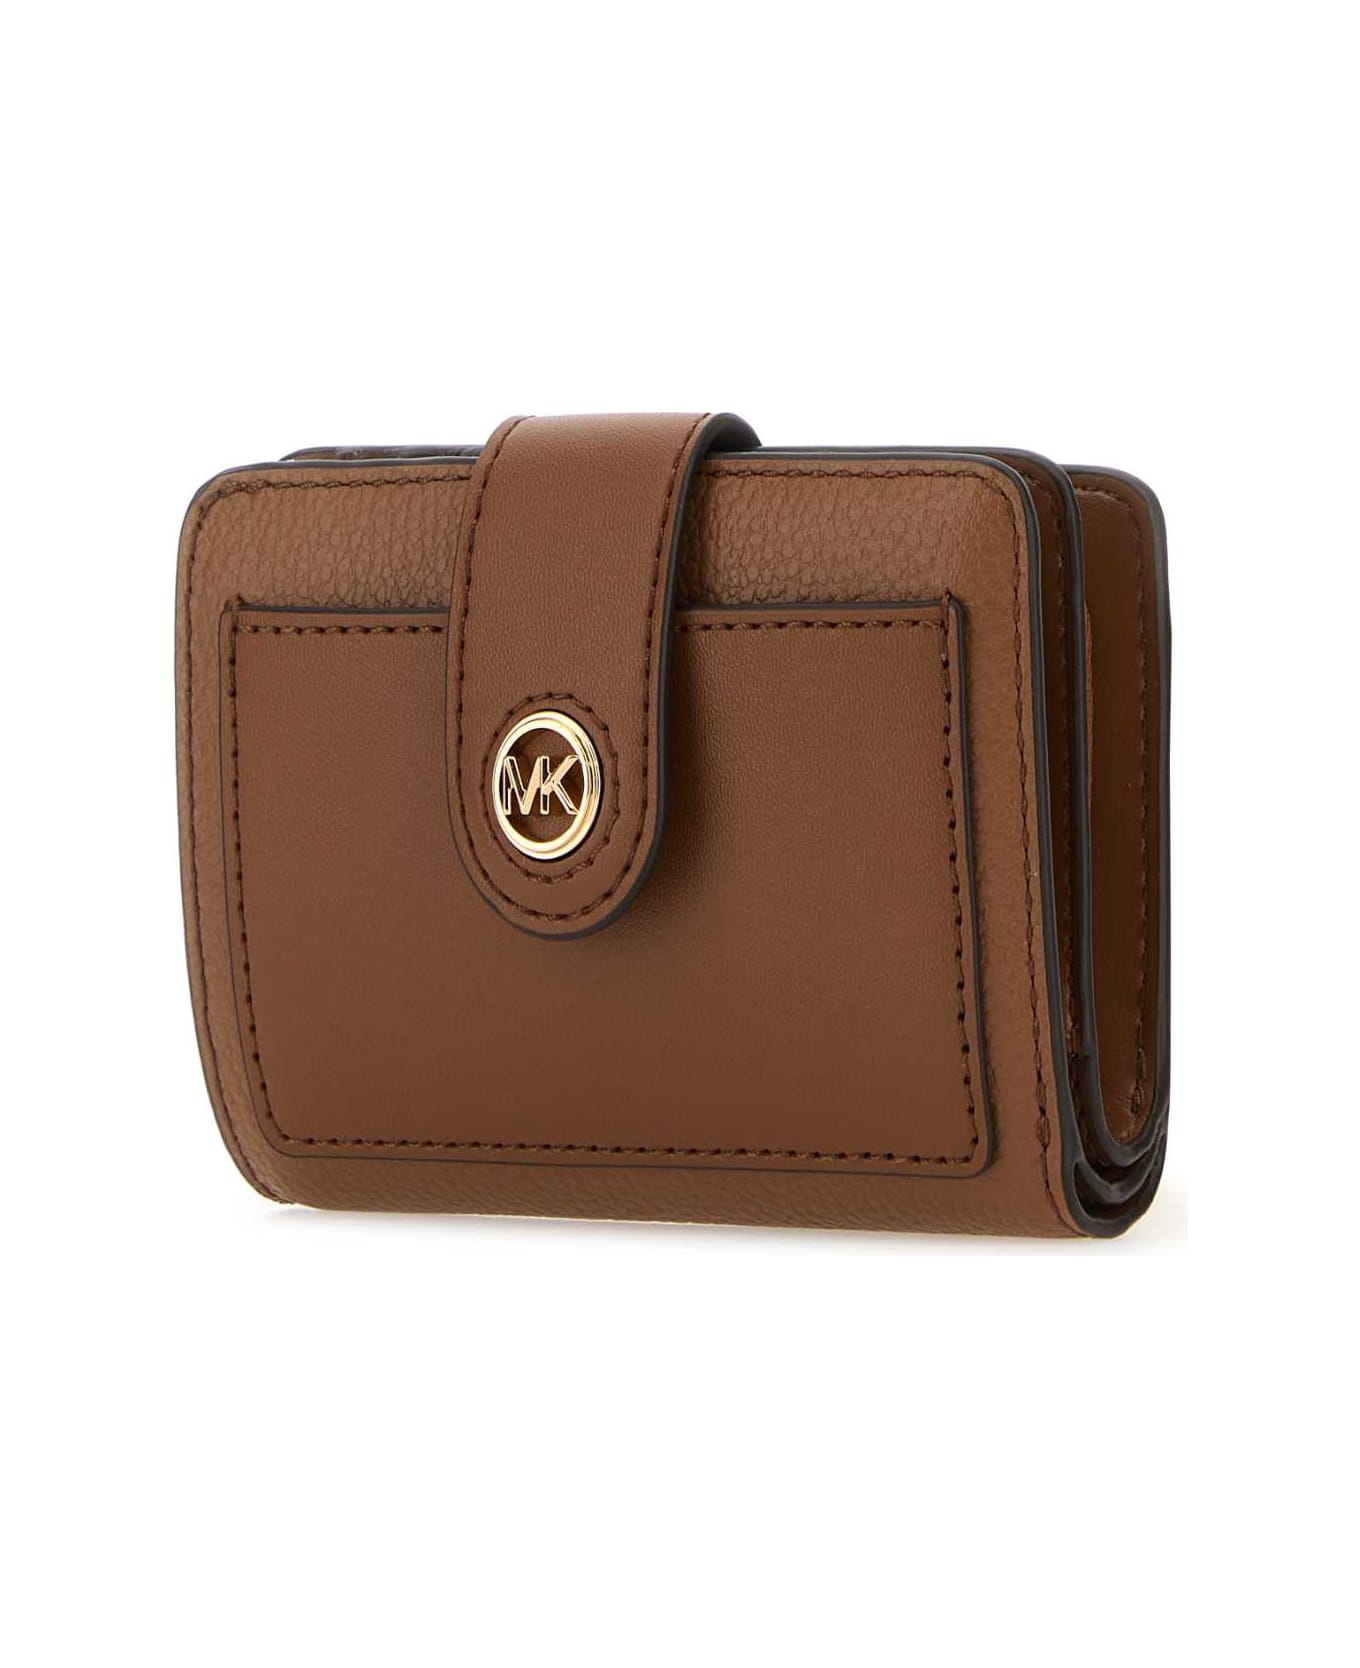 Michael Kors Camel Leather Wallet - LUGGAGE 財布